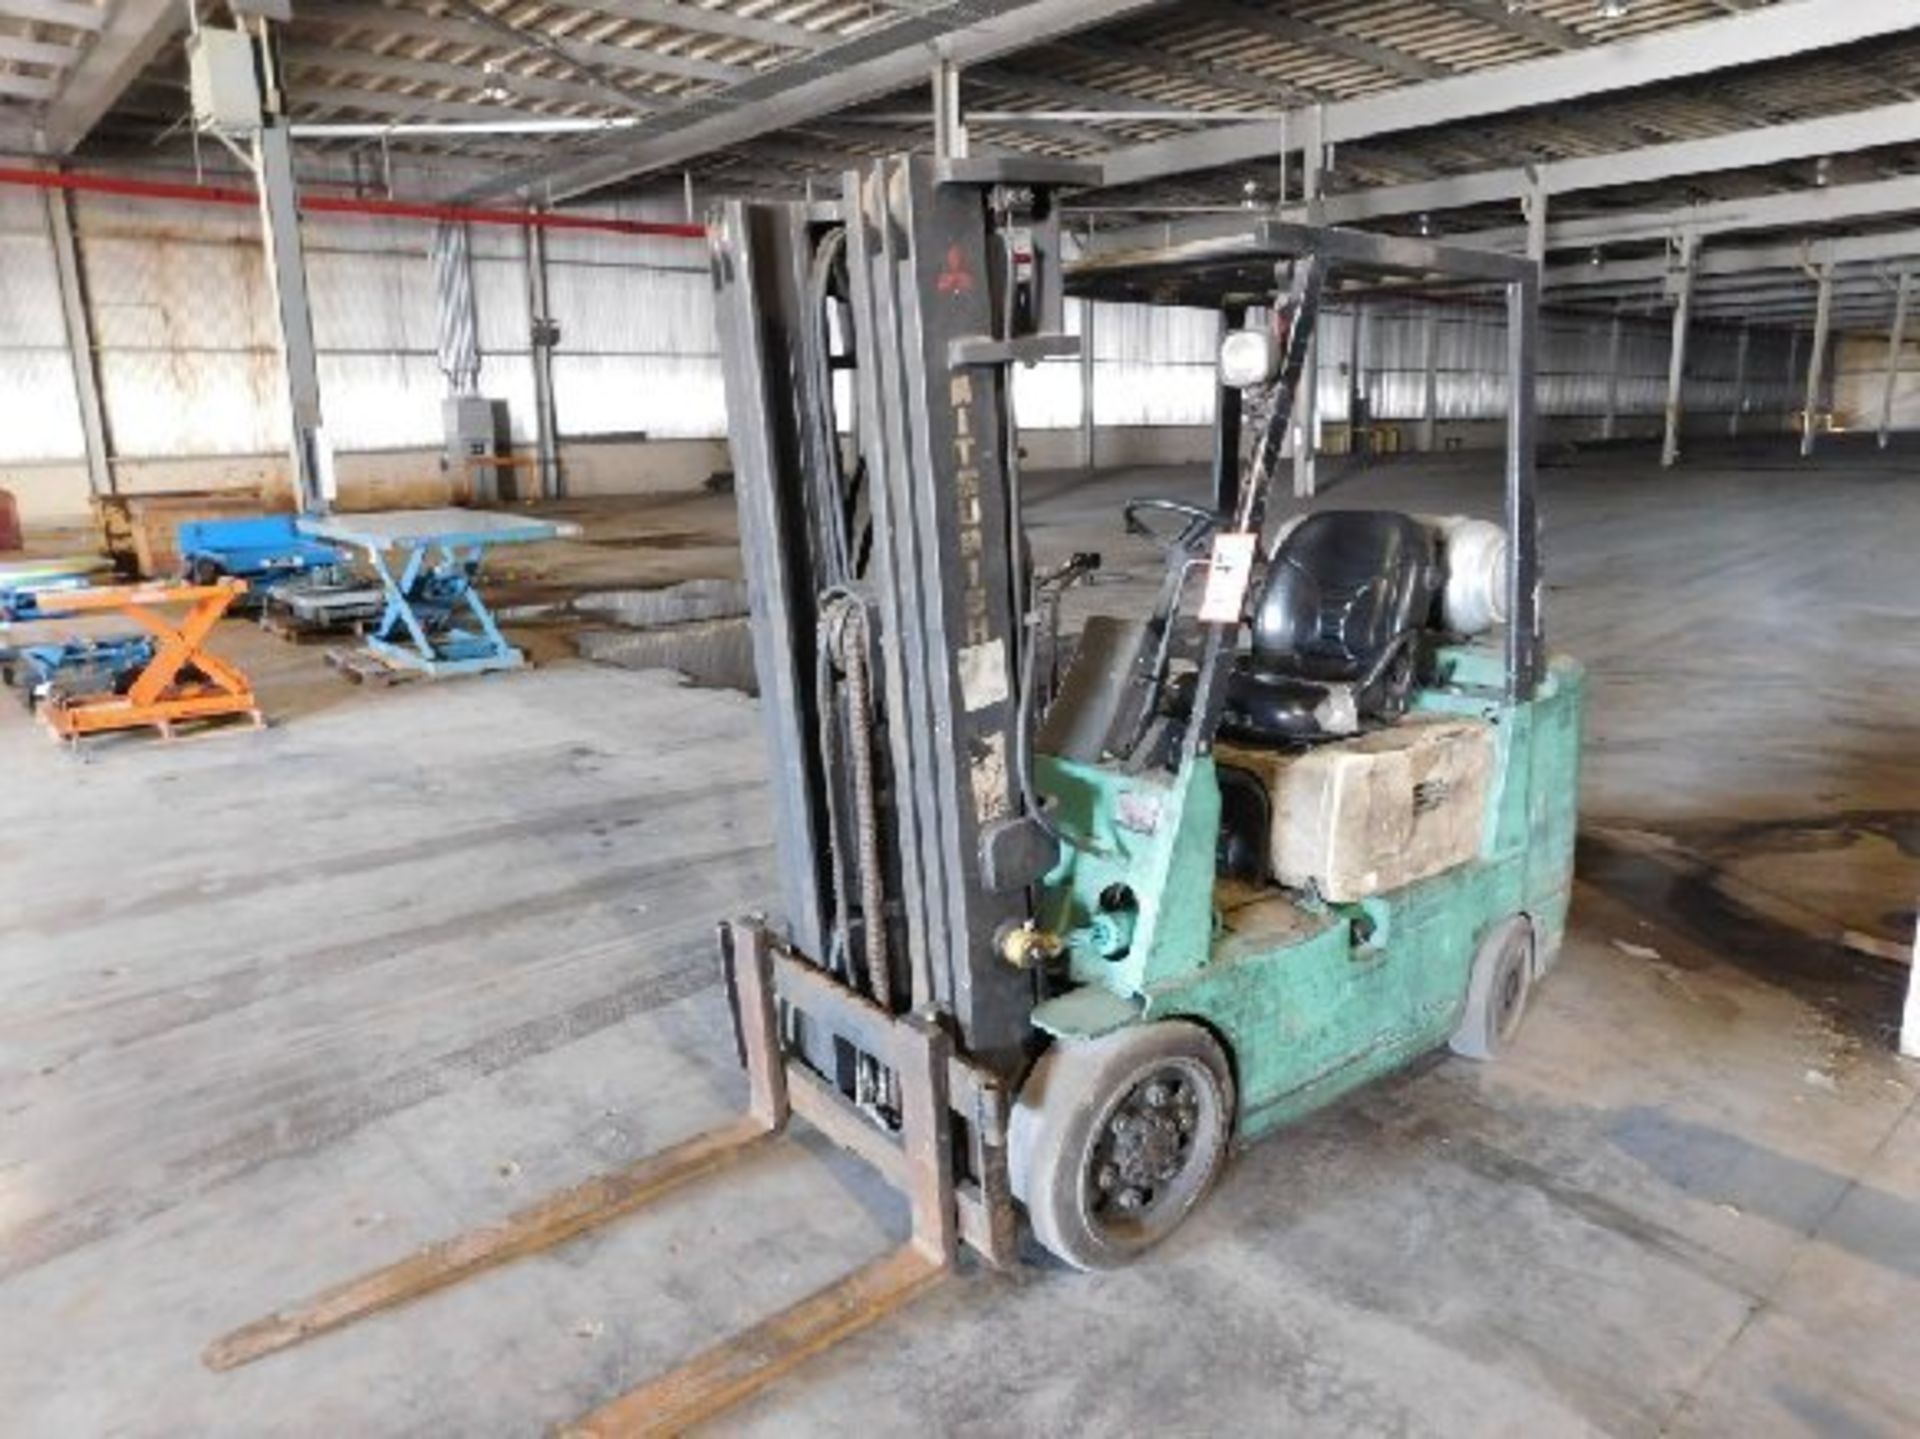 Mitsubishi FGC25 Forklift, 5,000lb. 139" Lift Height, LP Gas, 3 Stage Mast, solid tires - THIS